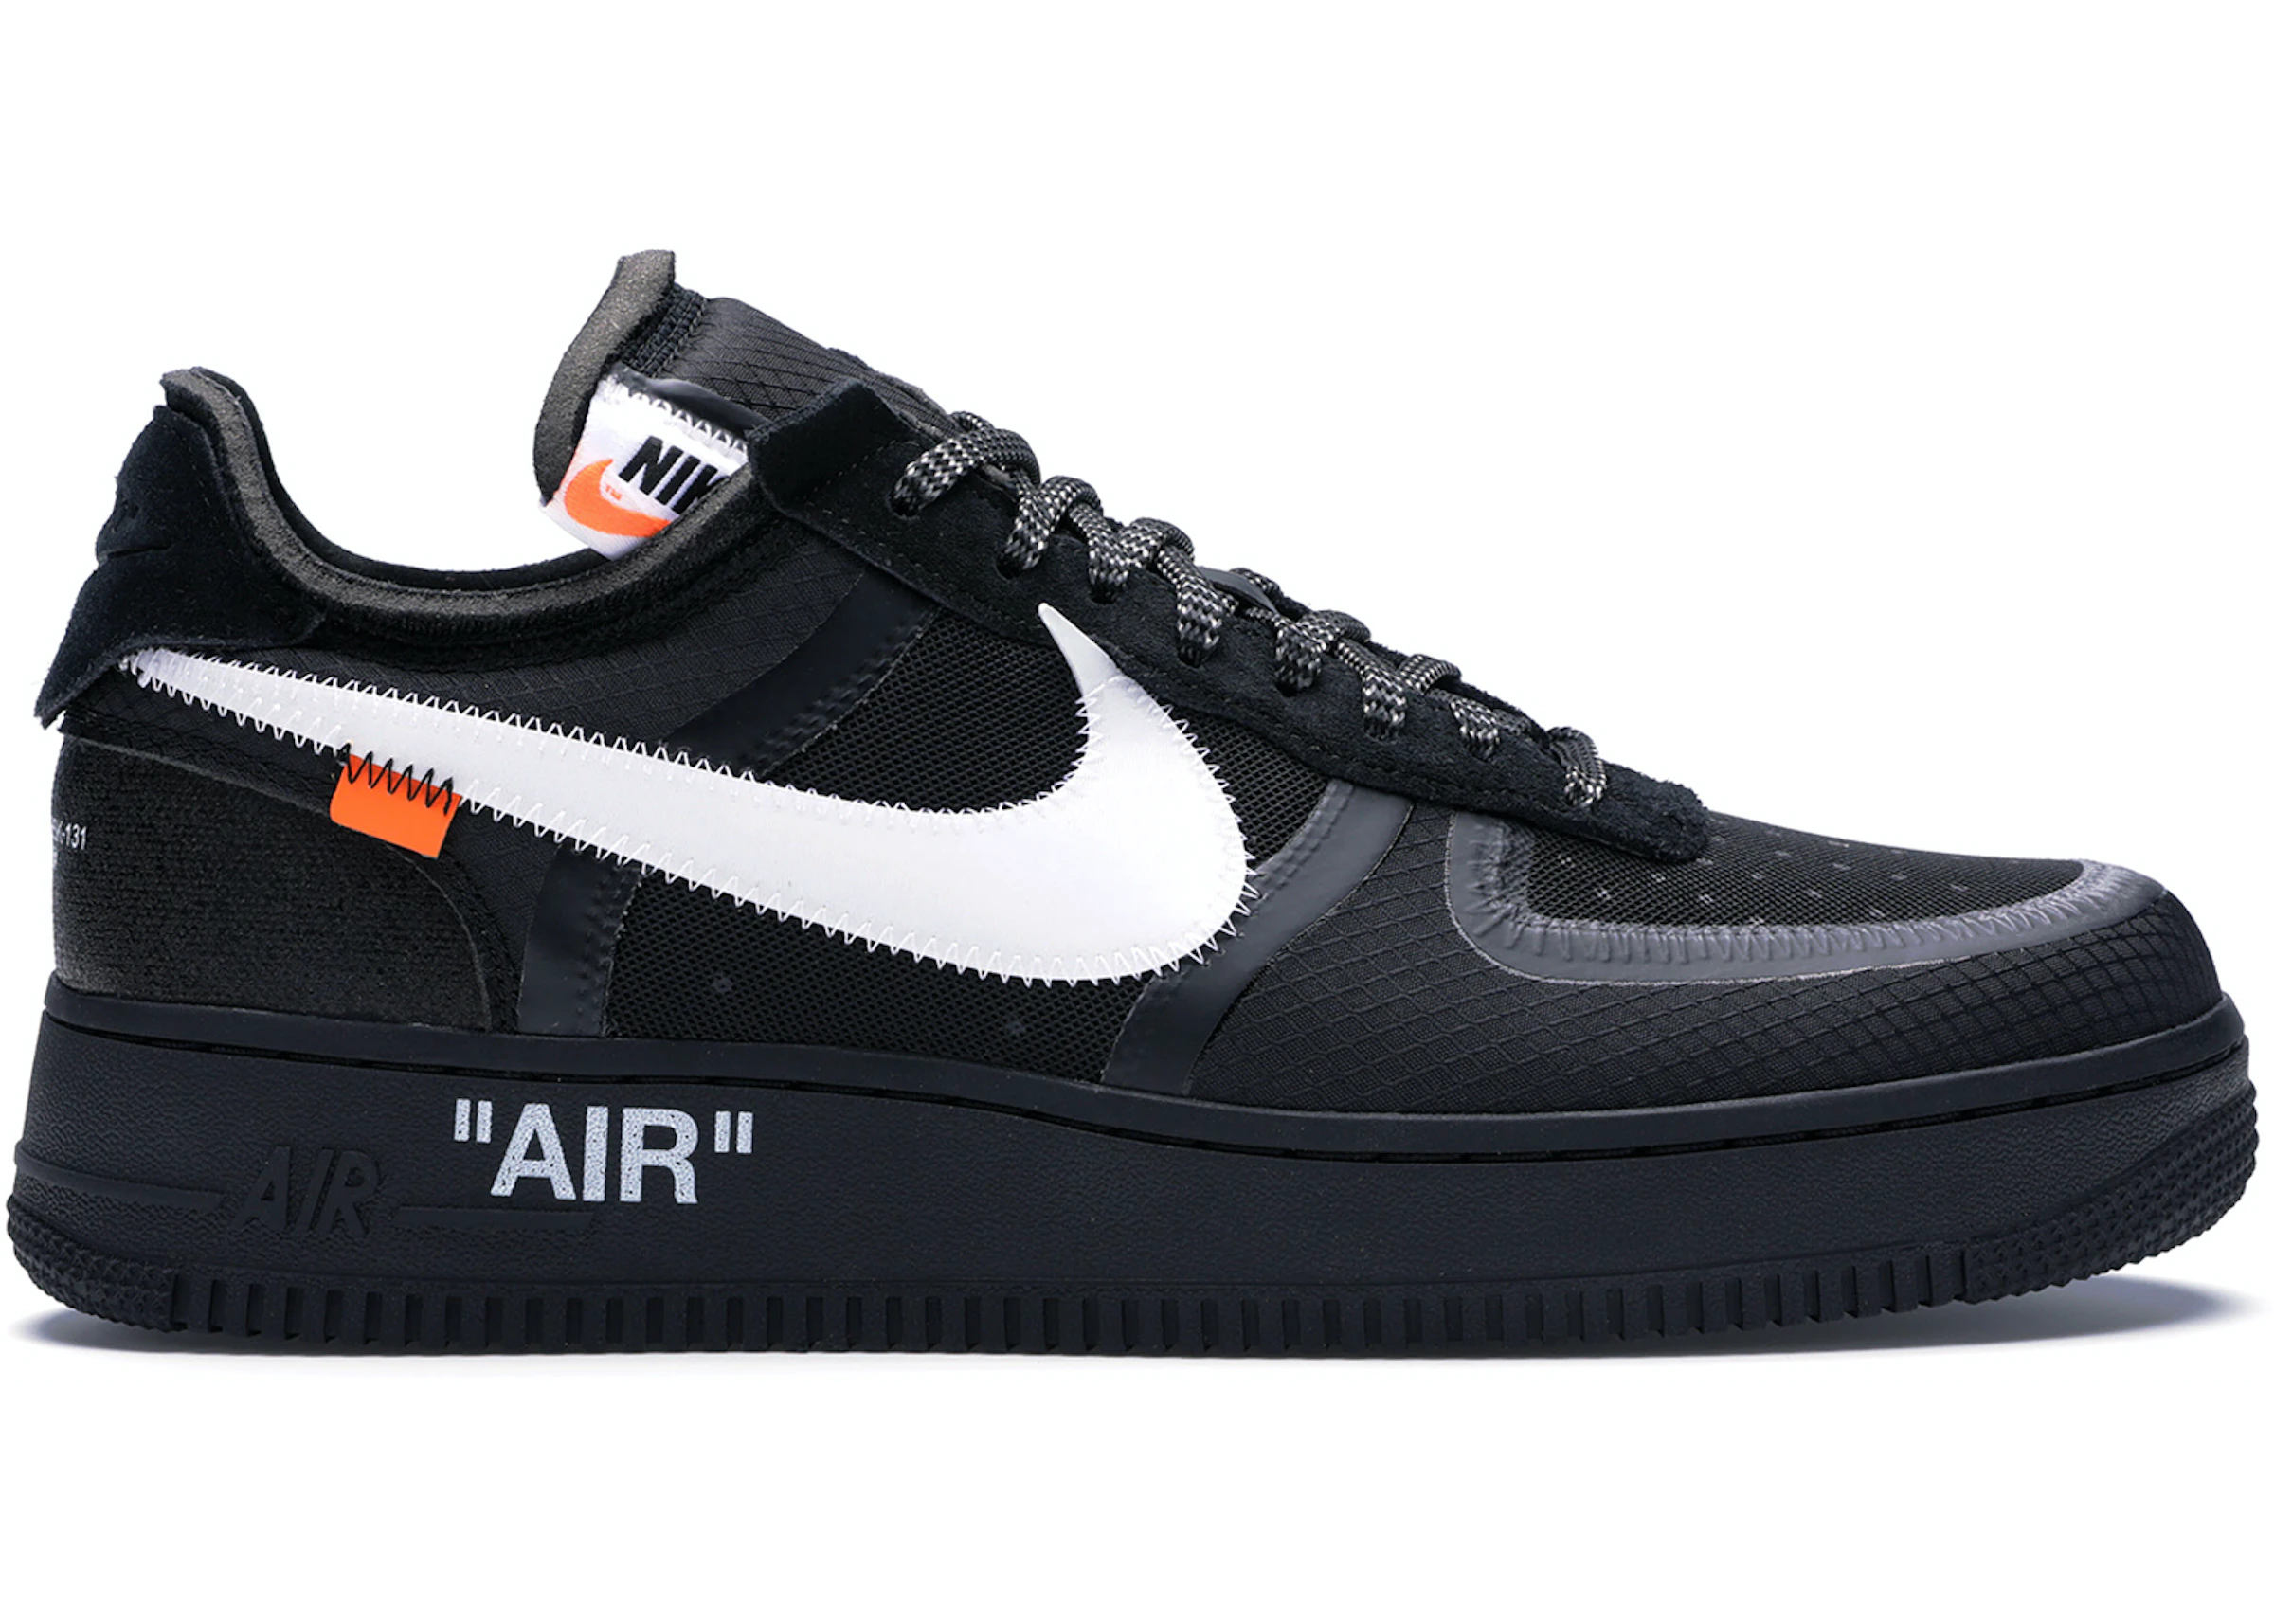 Addict Have a picnic Pickering Nike Air Force 1 Low Off-White Black White - AO4606-001 - US